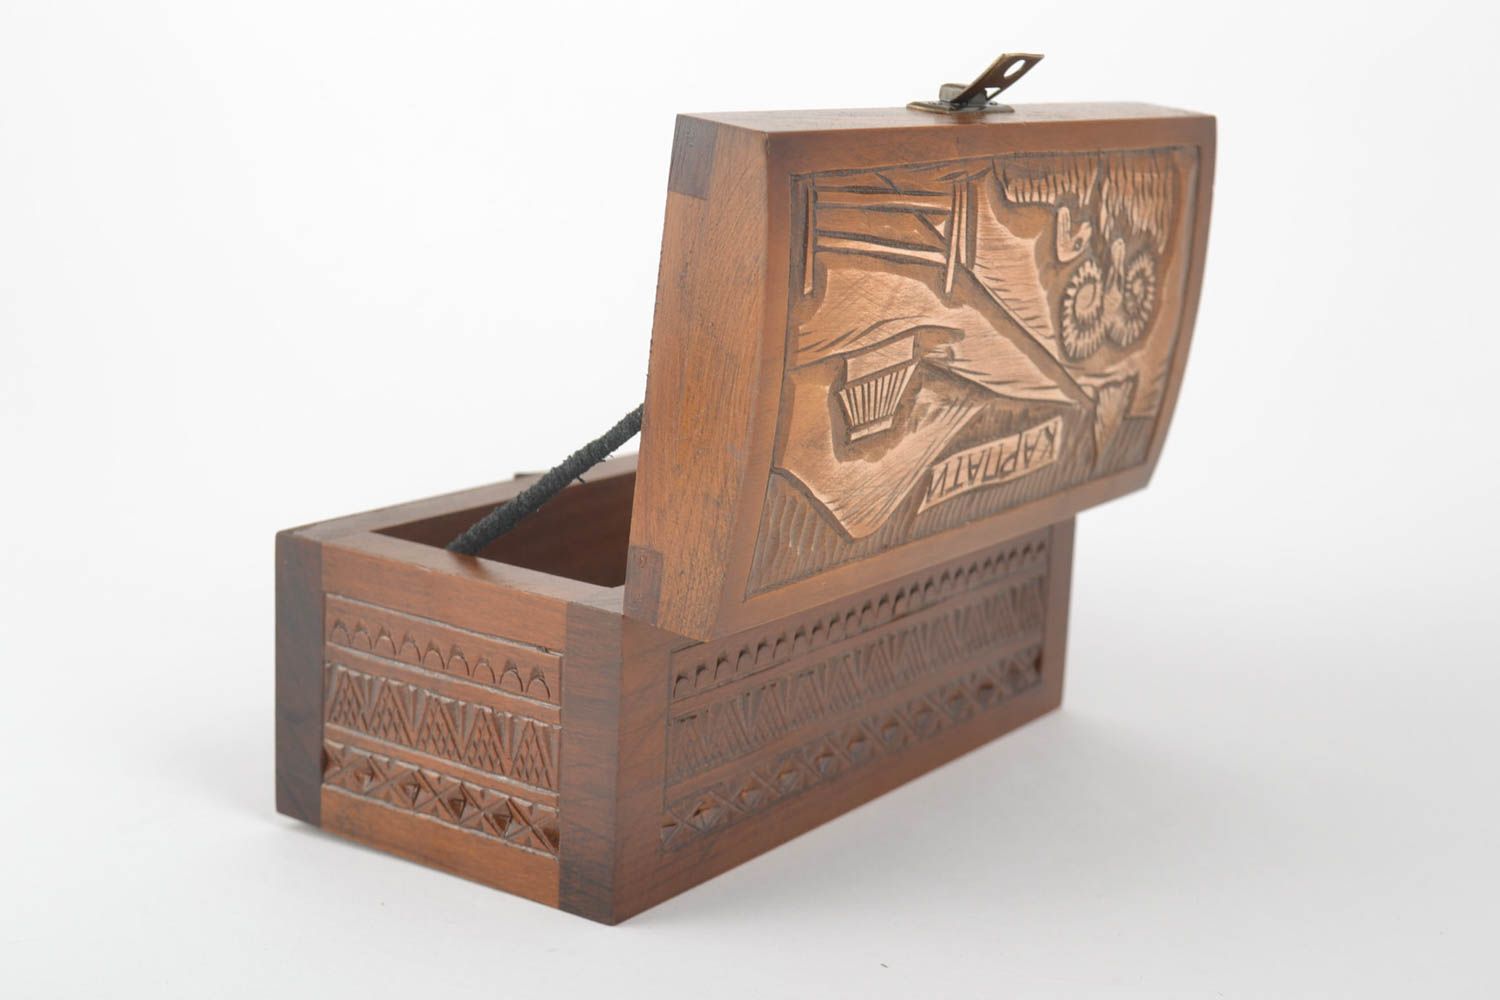 Decorative Wooden Boxes In Hyderabad (Secunderabad) - Prices, Manufacturers  & Suppliers